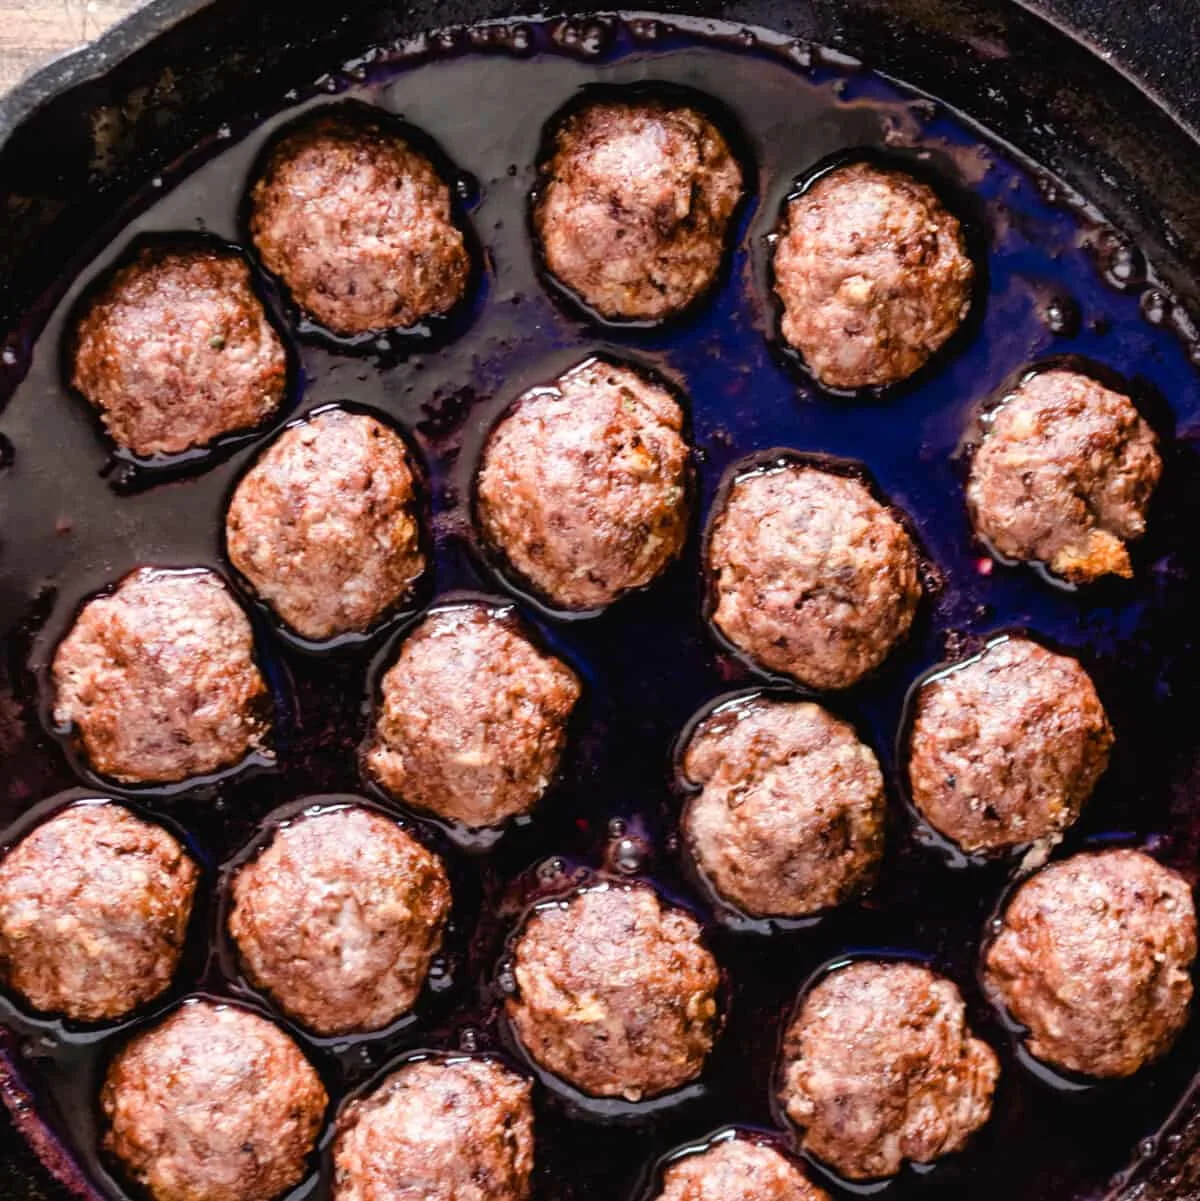 Meatballs simmering in a sauce in a skillet.